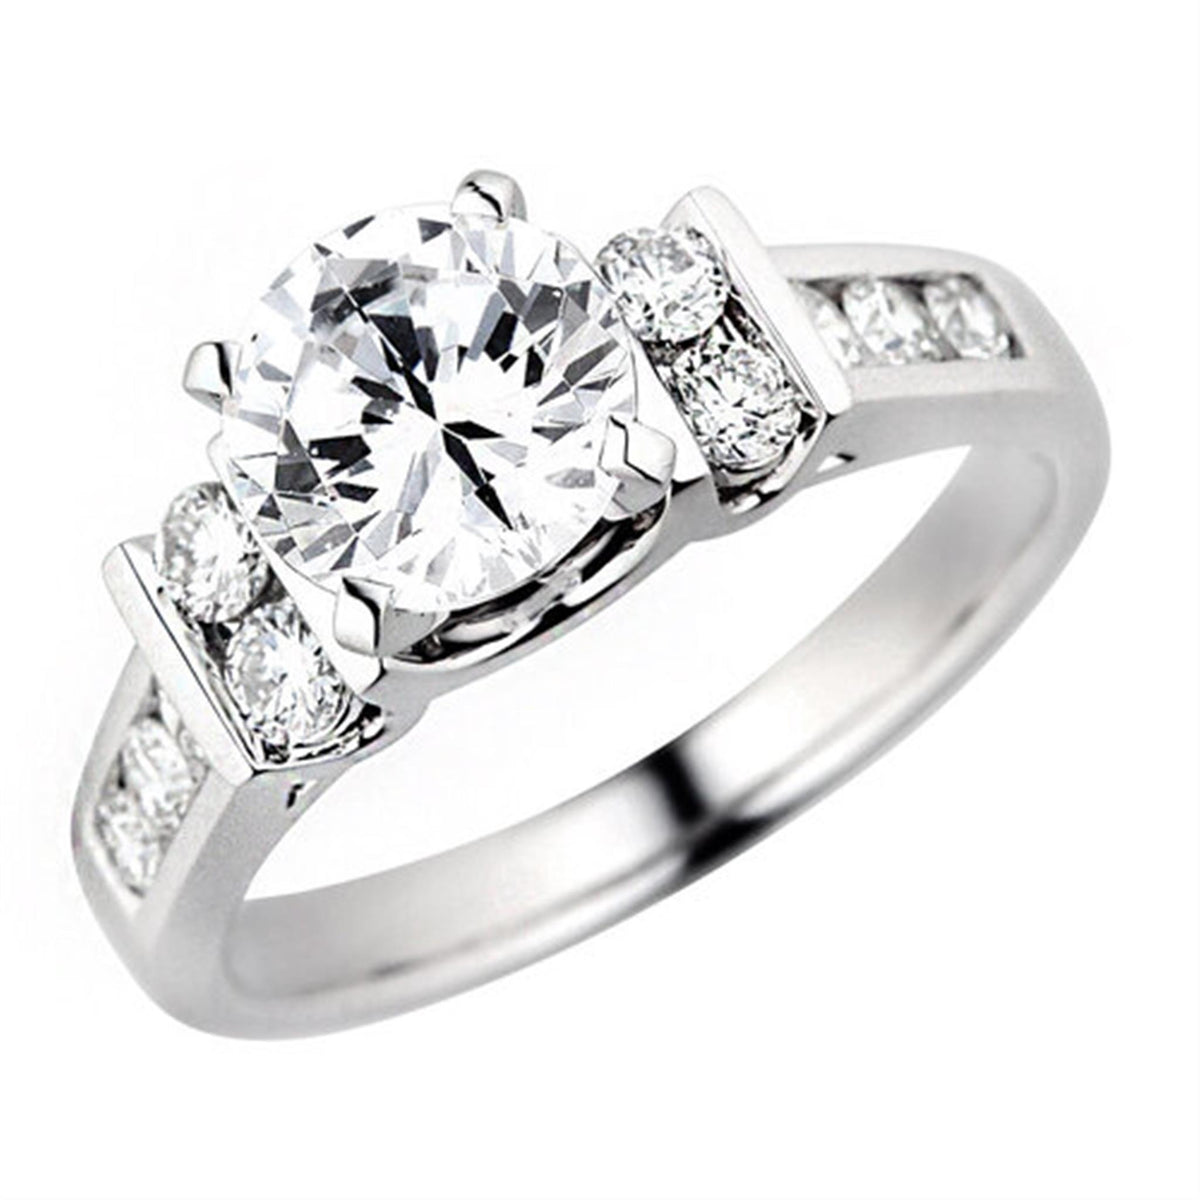 14Kt White Gold Channel Set Engagement Ring Mounting With 0.50cttw Natural Diamonds